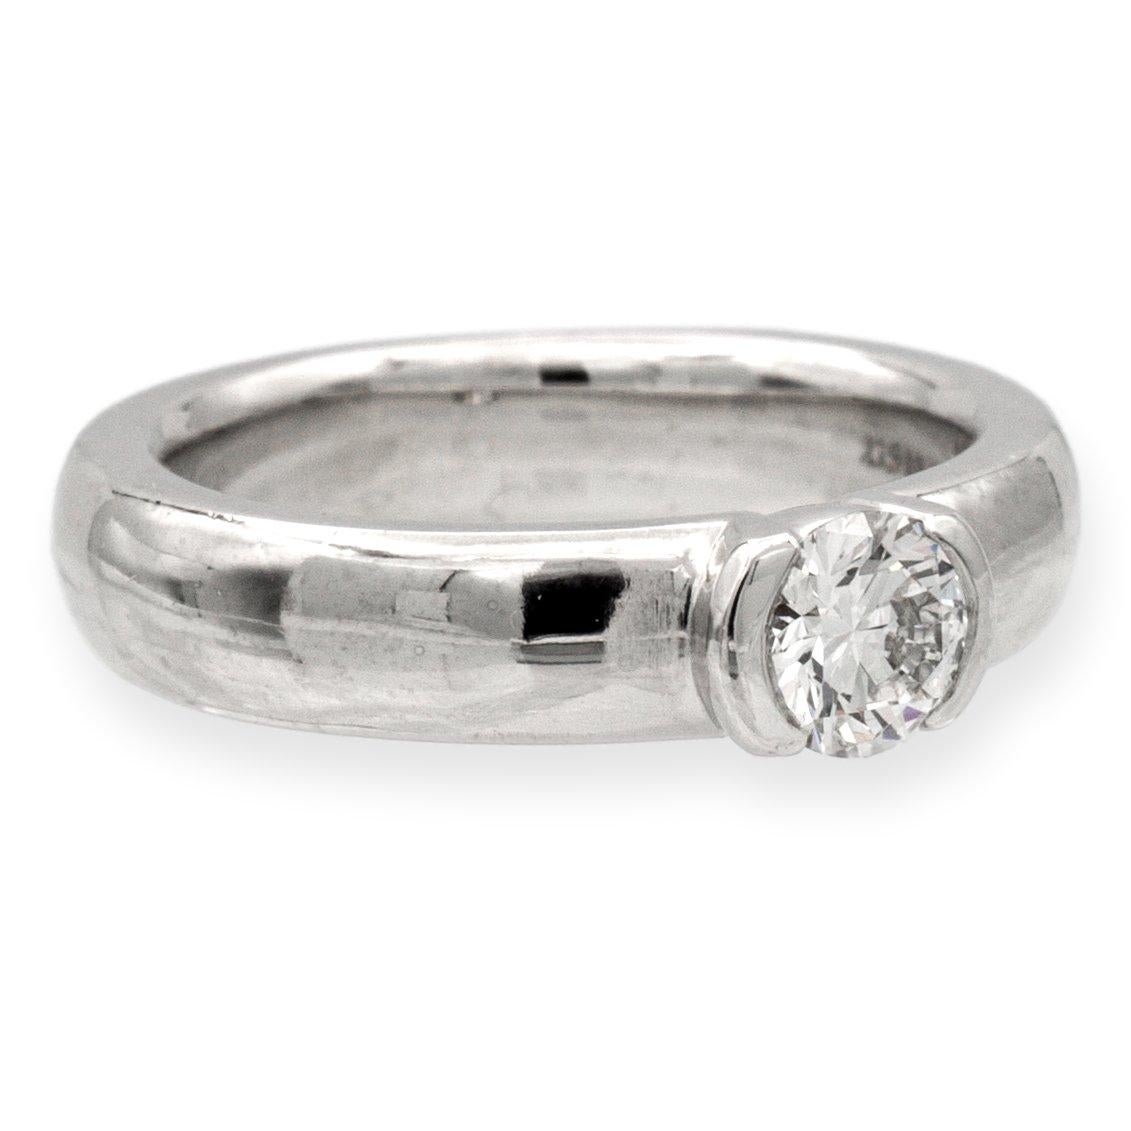 Tiffany and Co. engagement ring from the Etoile collection finely crafted in platinum featuring a round brilliant cut diamond center weighing 0.40 cts. F color , VVS1 clarity set in a half bezel setting. Fully hallmarked with Tiffany logos and metal